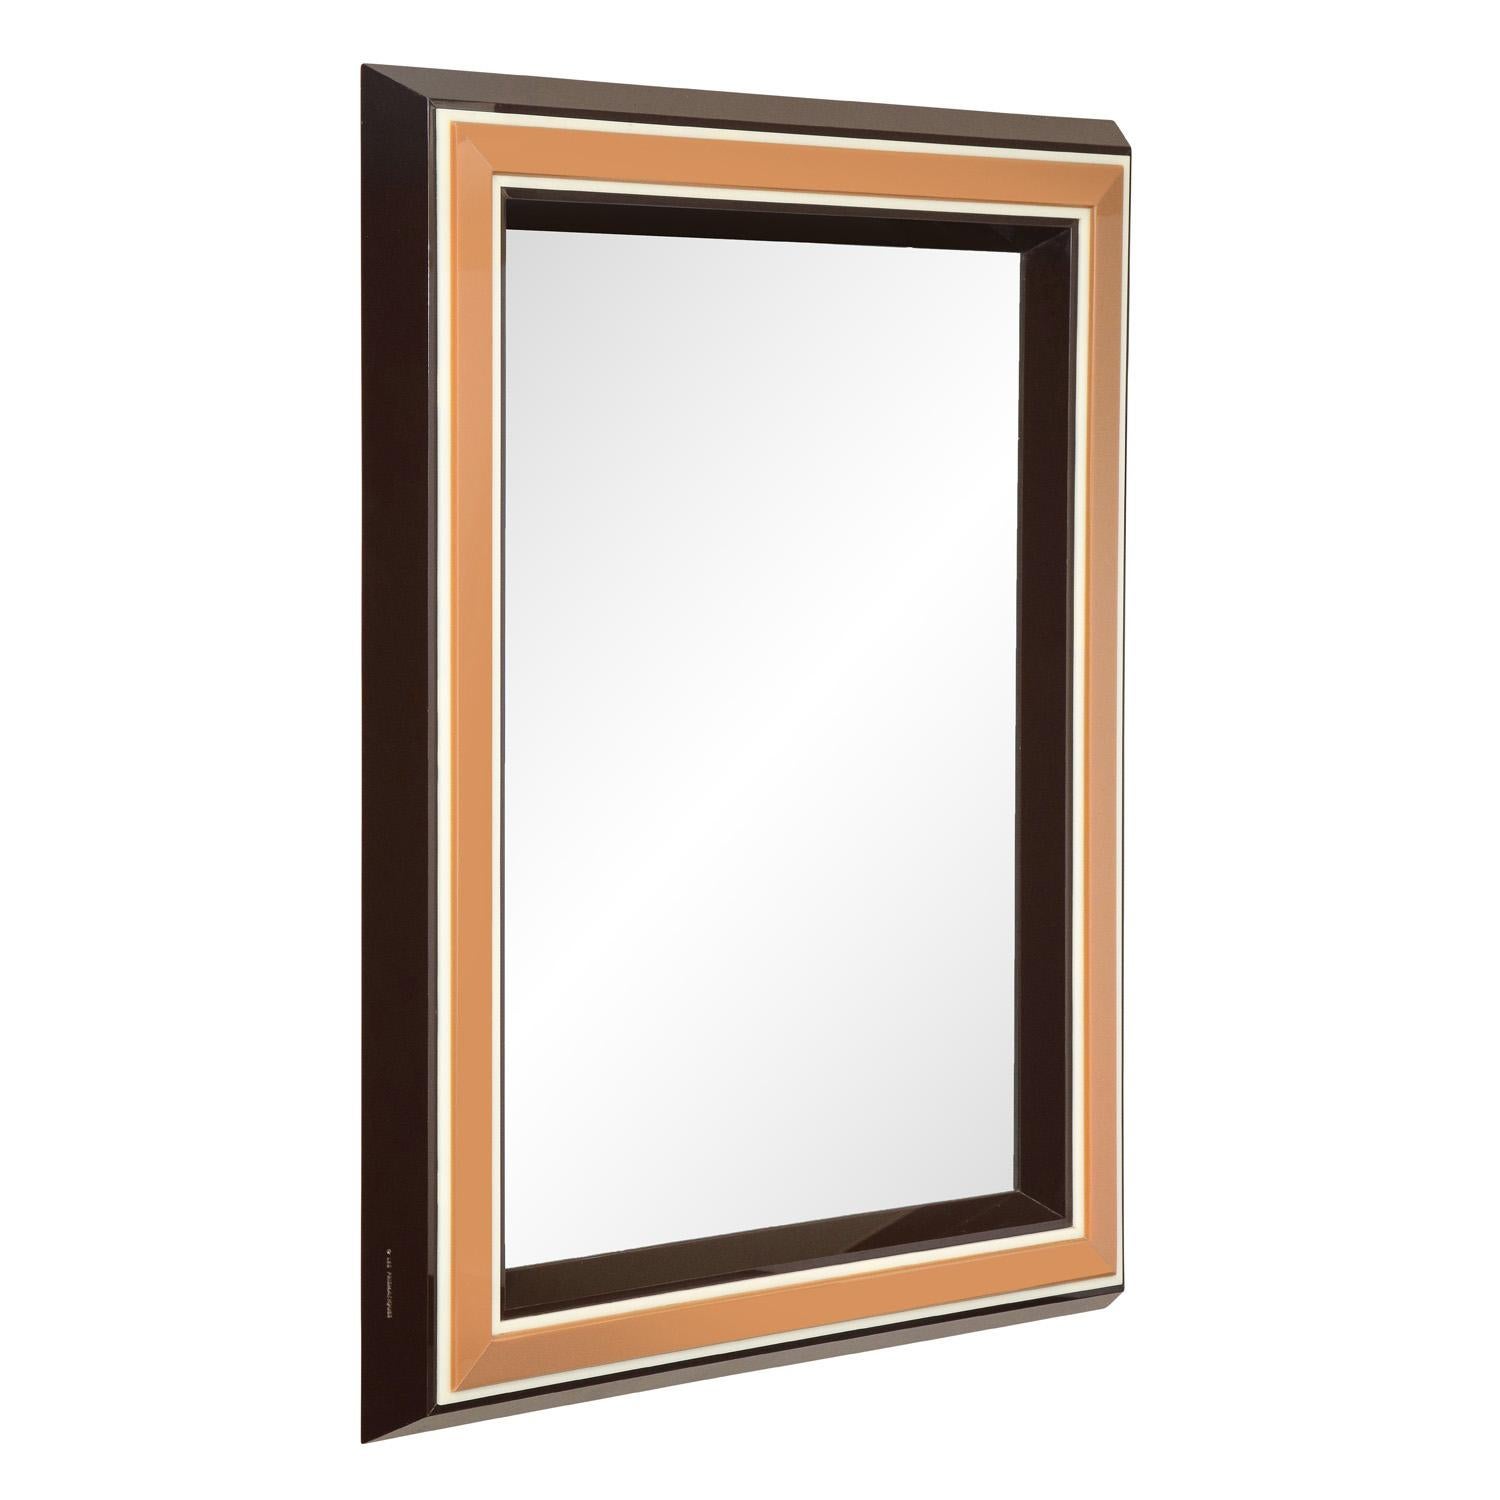 Chic wall hanging mirror with frame in molded brown, white and tan solid lucite by Les Prismatiques, American 1970's (signed “Les Prismatiques” on side). The color combination is super stylish and it’s beautifully made.